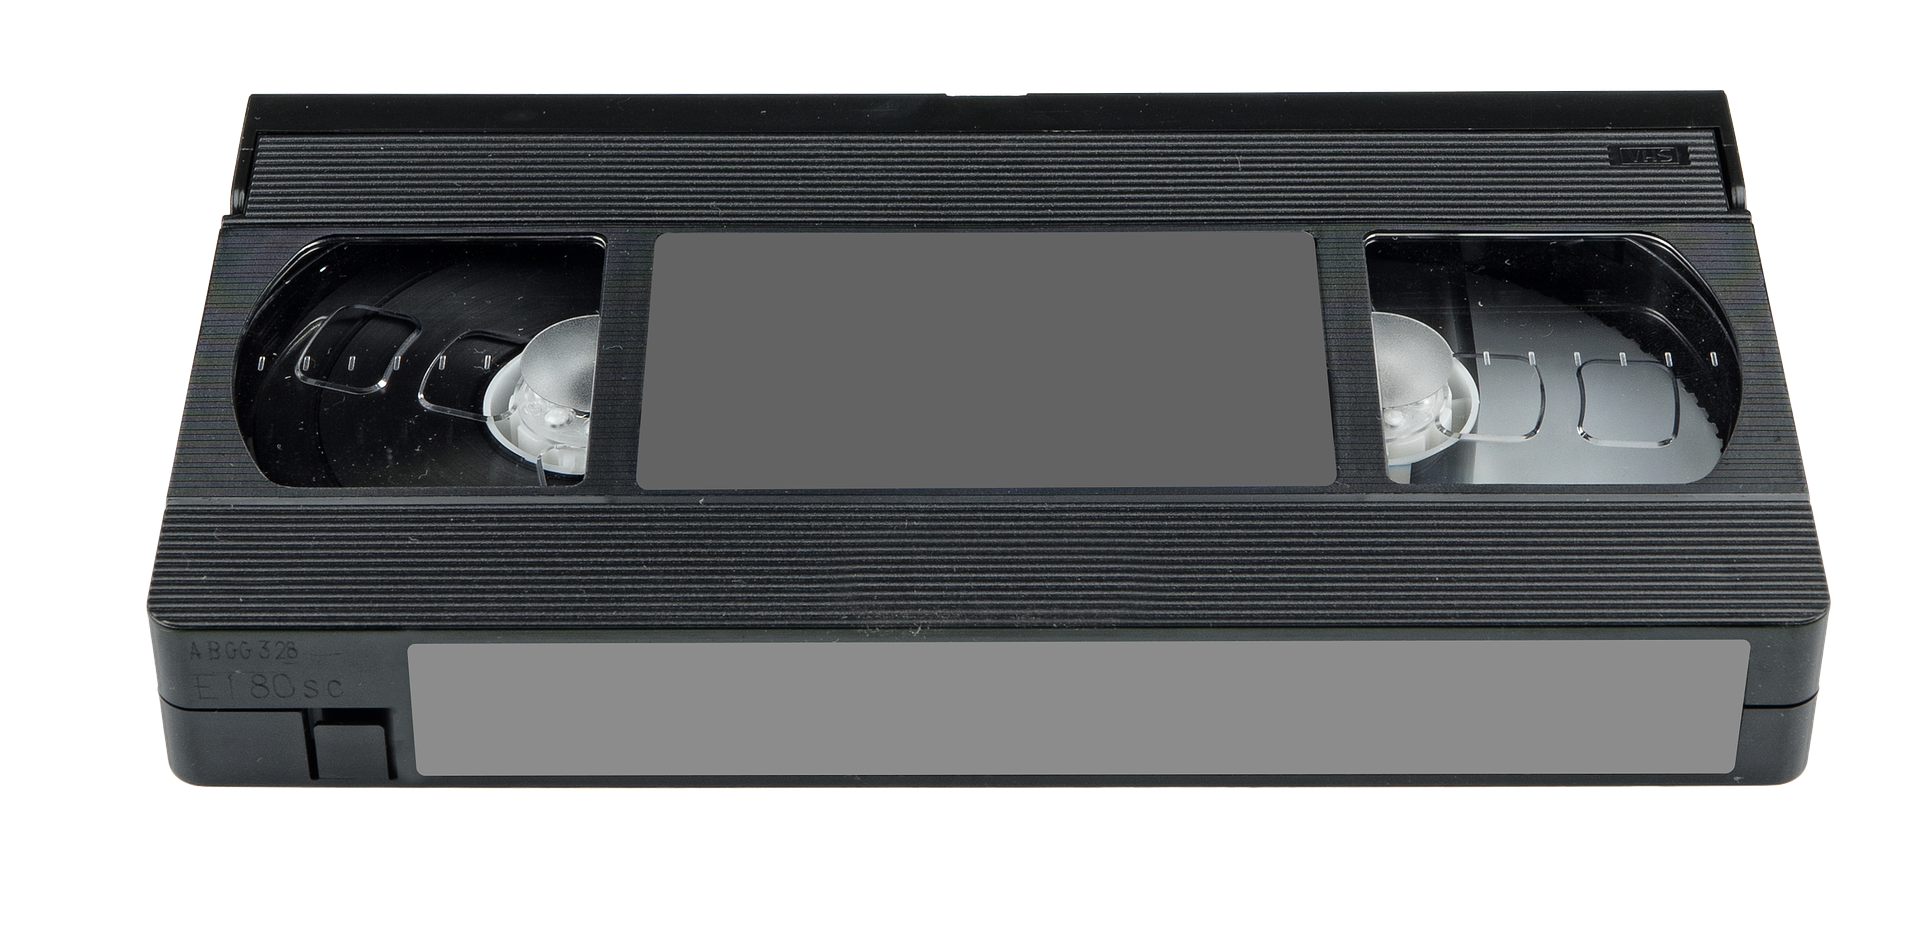 vcr tapes to dvd